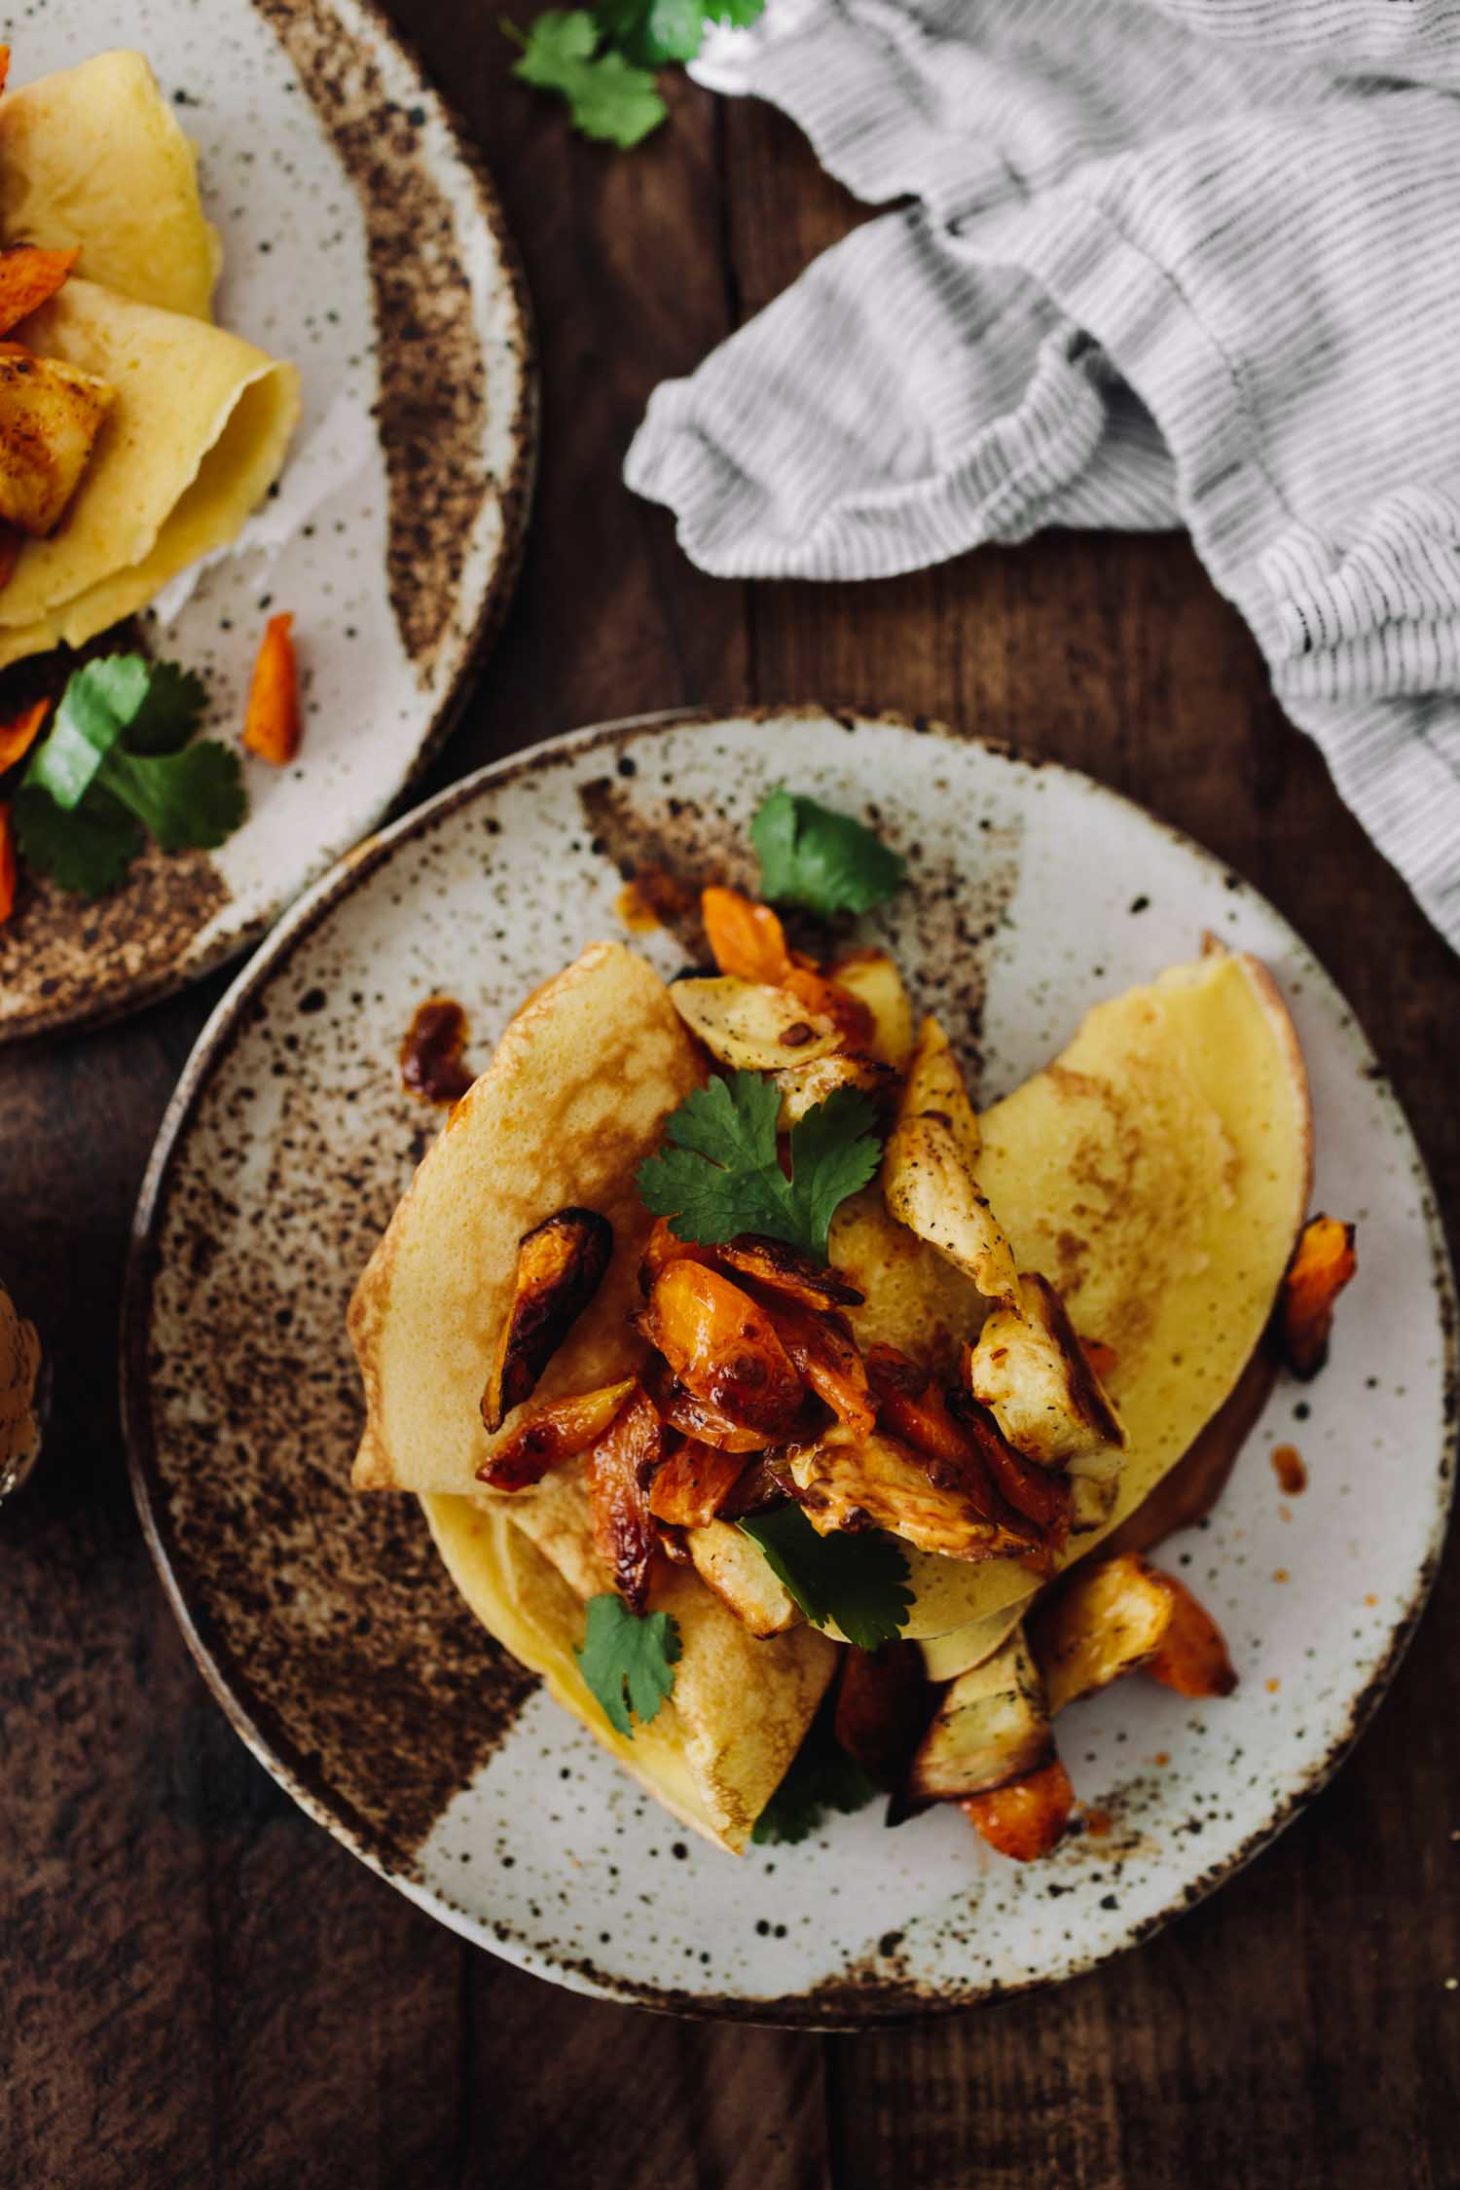 Chickpea Crepes with Roasted Vegetables and Chipotle Compound Butter